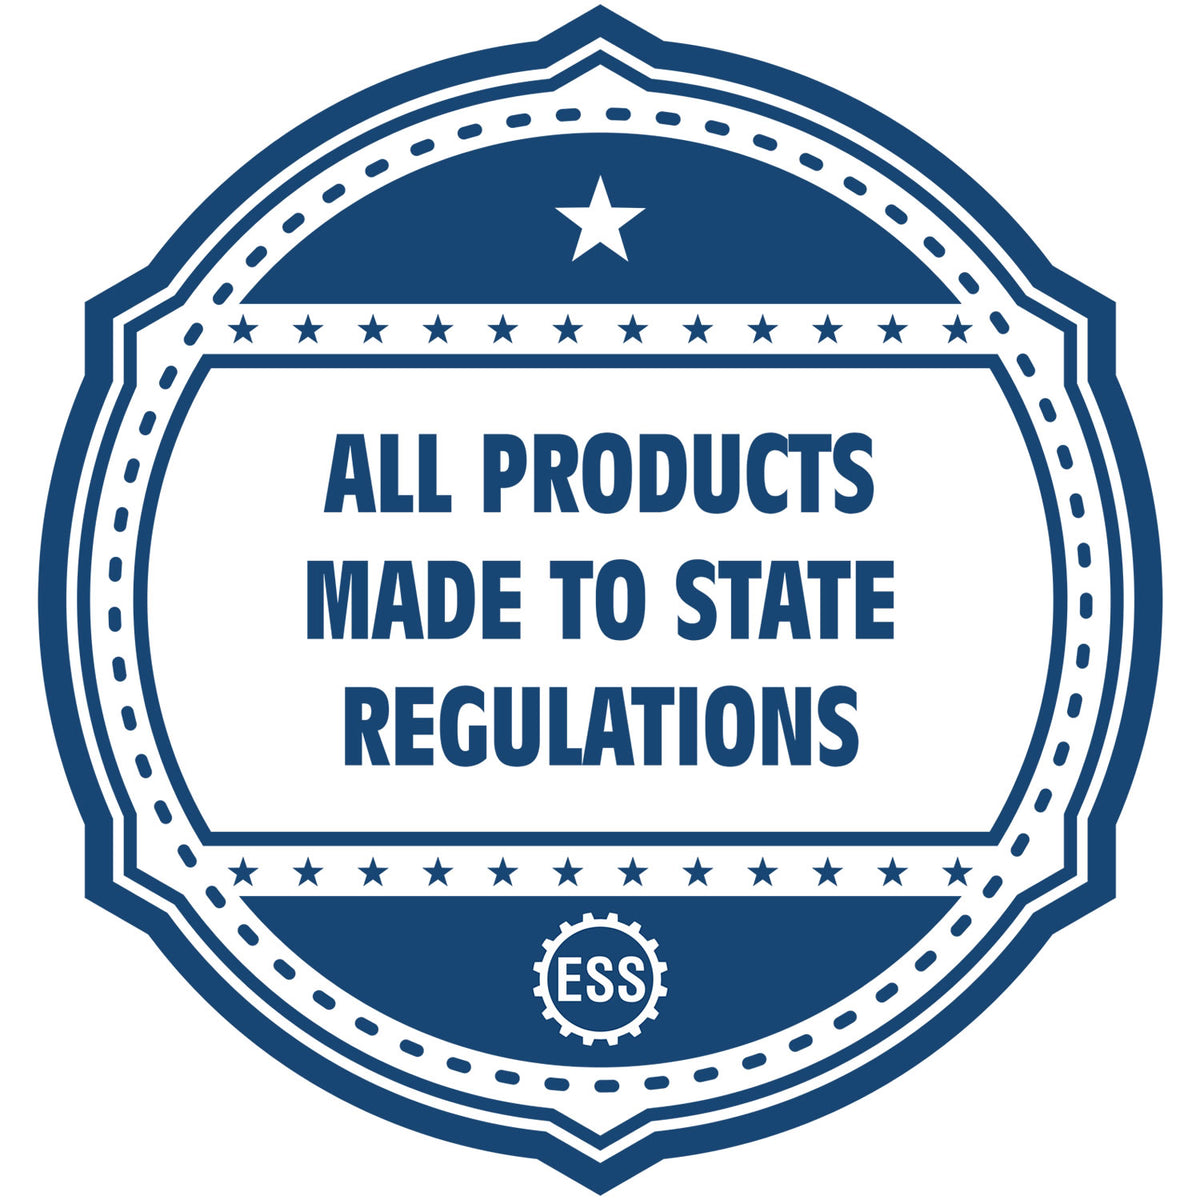 An icon or badge element for the Soft Hawaii Professional Engineer Seal showing that this product is made in compliance with state regulations.